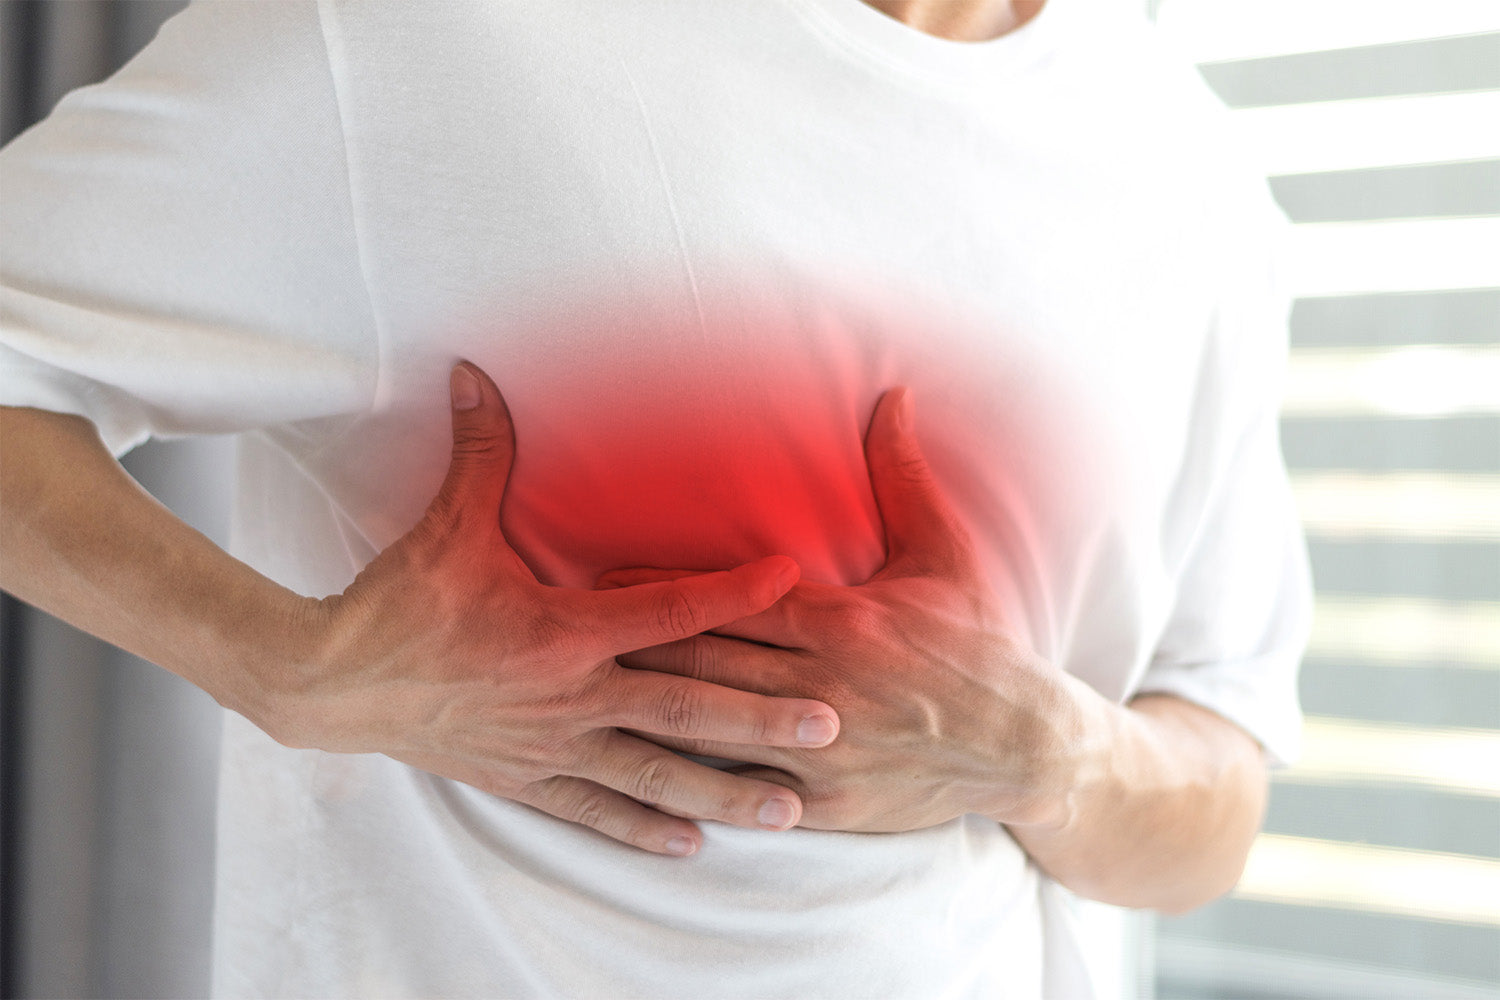 Sharp Pain Under Left Rib, A heart attack is rarely the cause of